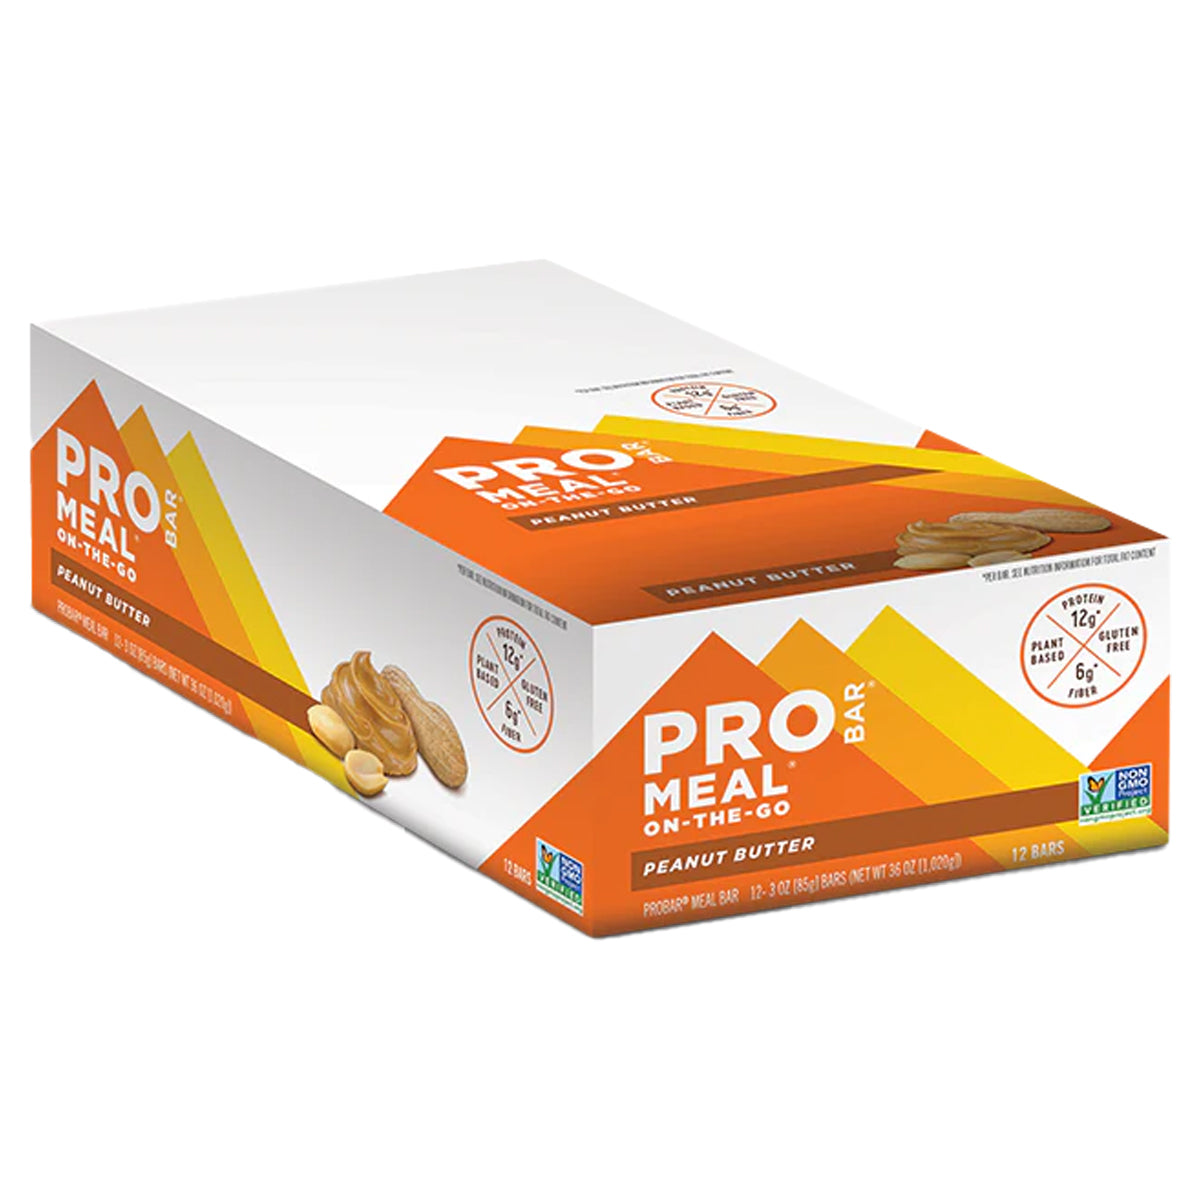 PROBAR Meal Bar in Peanut Butter by GOHUNT | Pro Bar - GOHUNT Shop